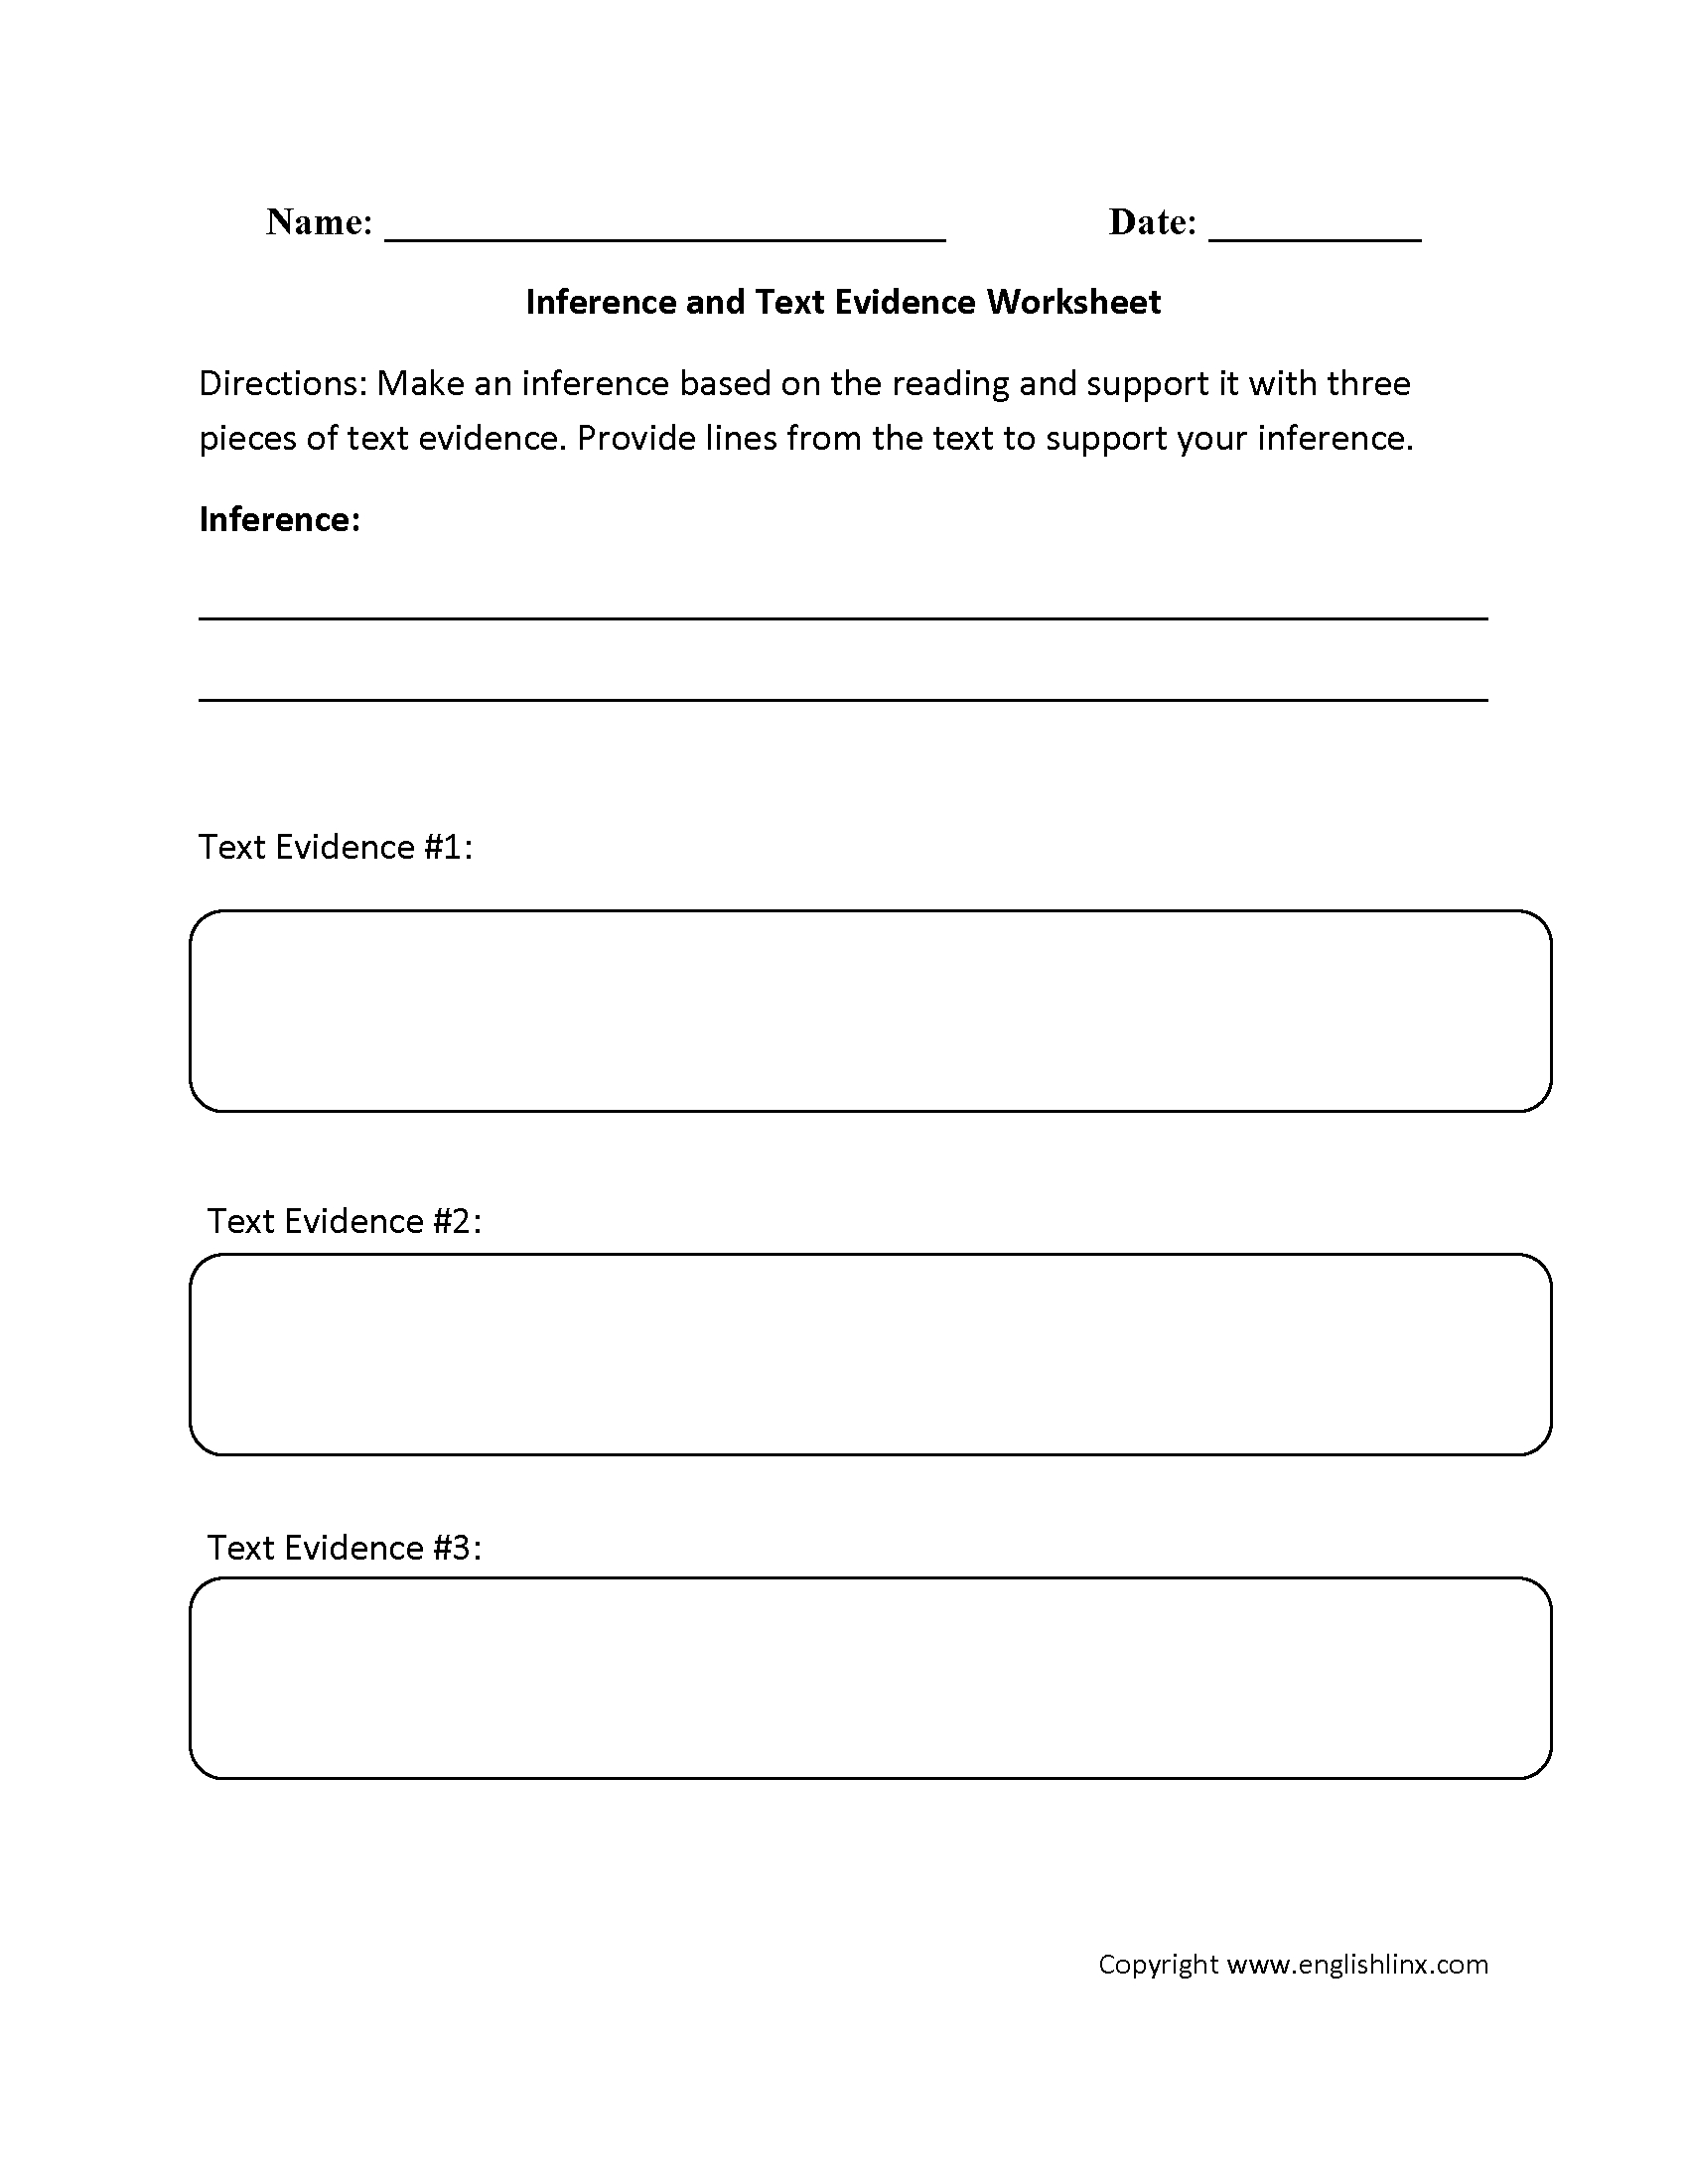 citing-textual-evidence-worksheet-6th-grade-db-excel